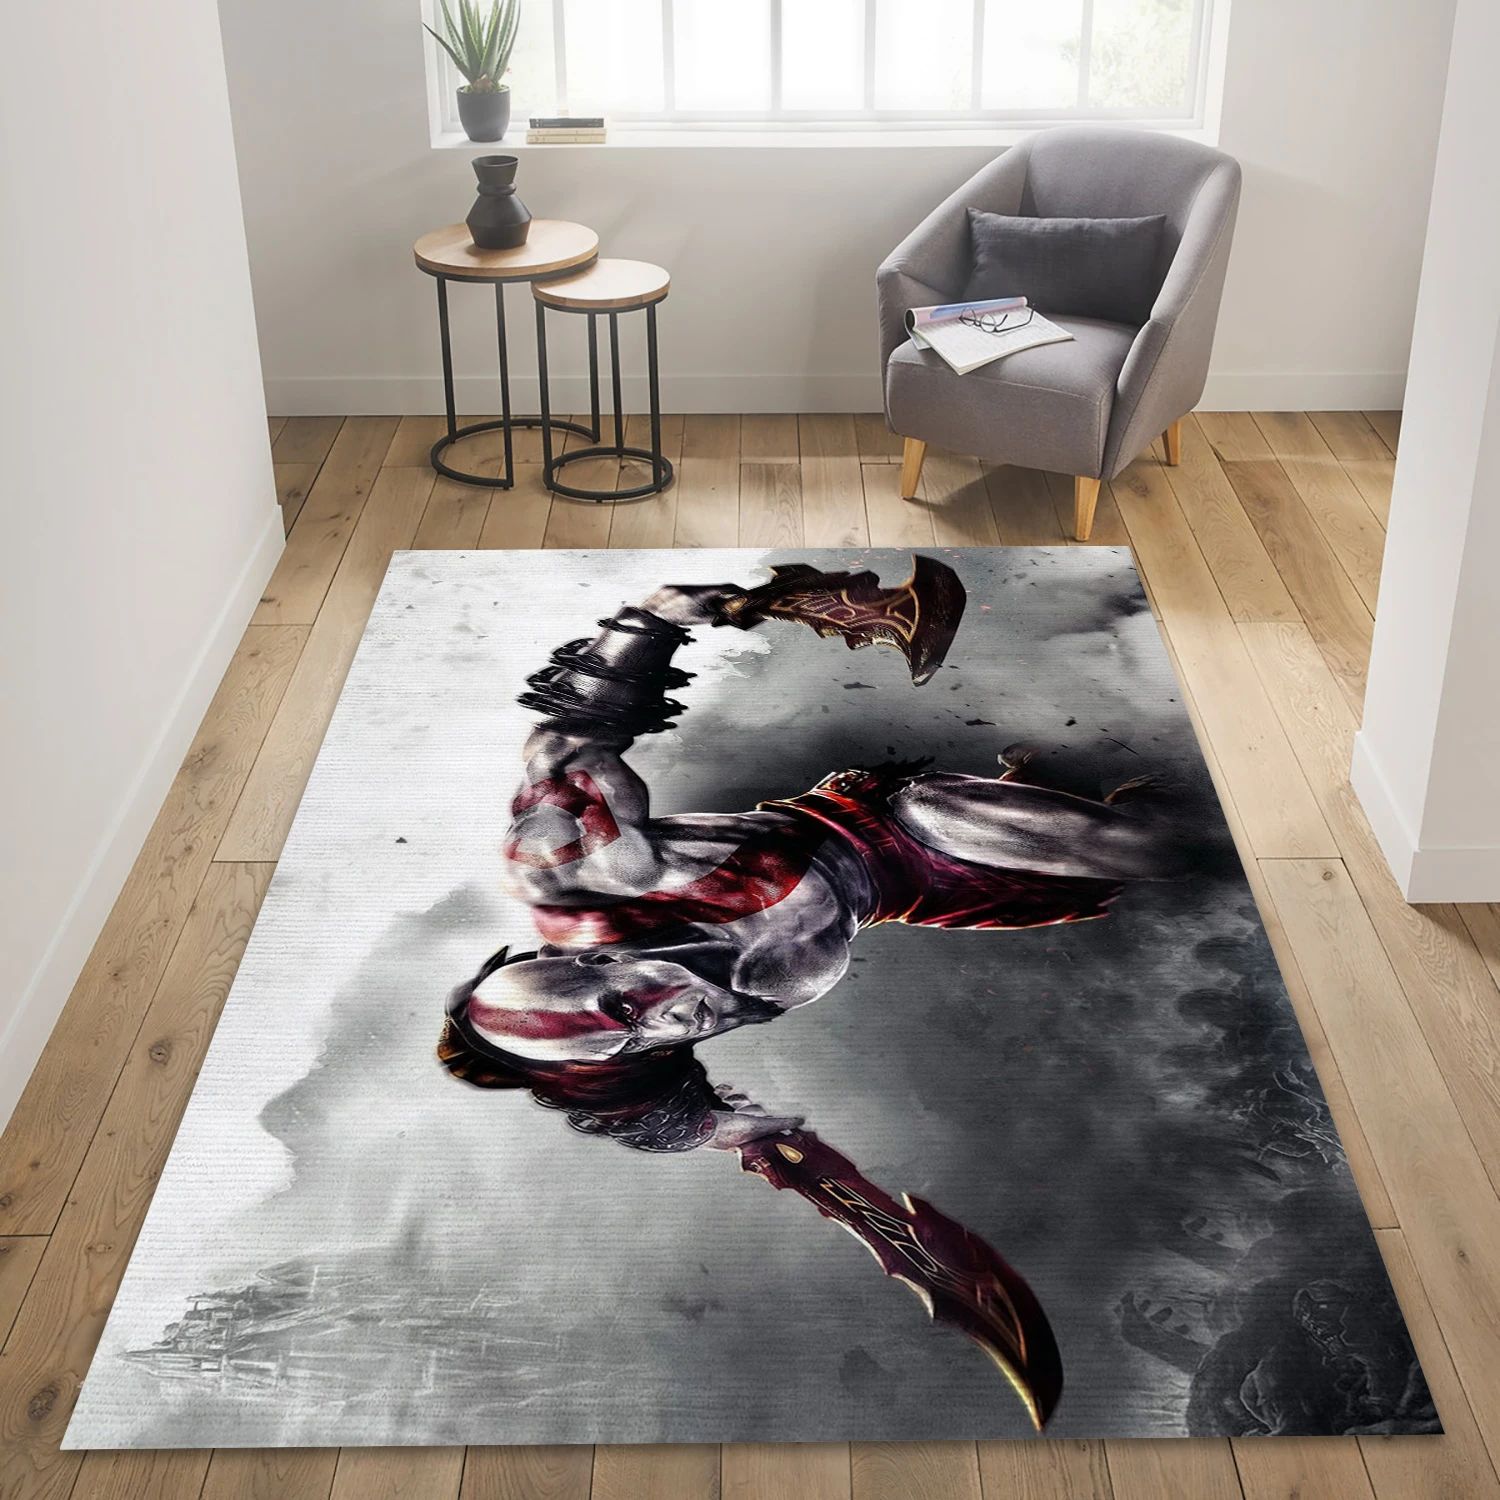 God Of War Video Game Area Rug For Christmas, Area Rug - Home Decor Floor Decor - Indoor Outdoor Rugs 1